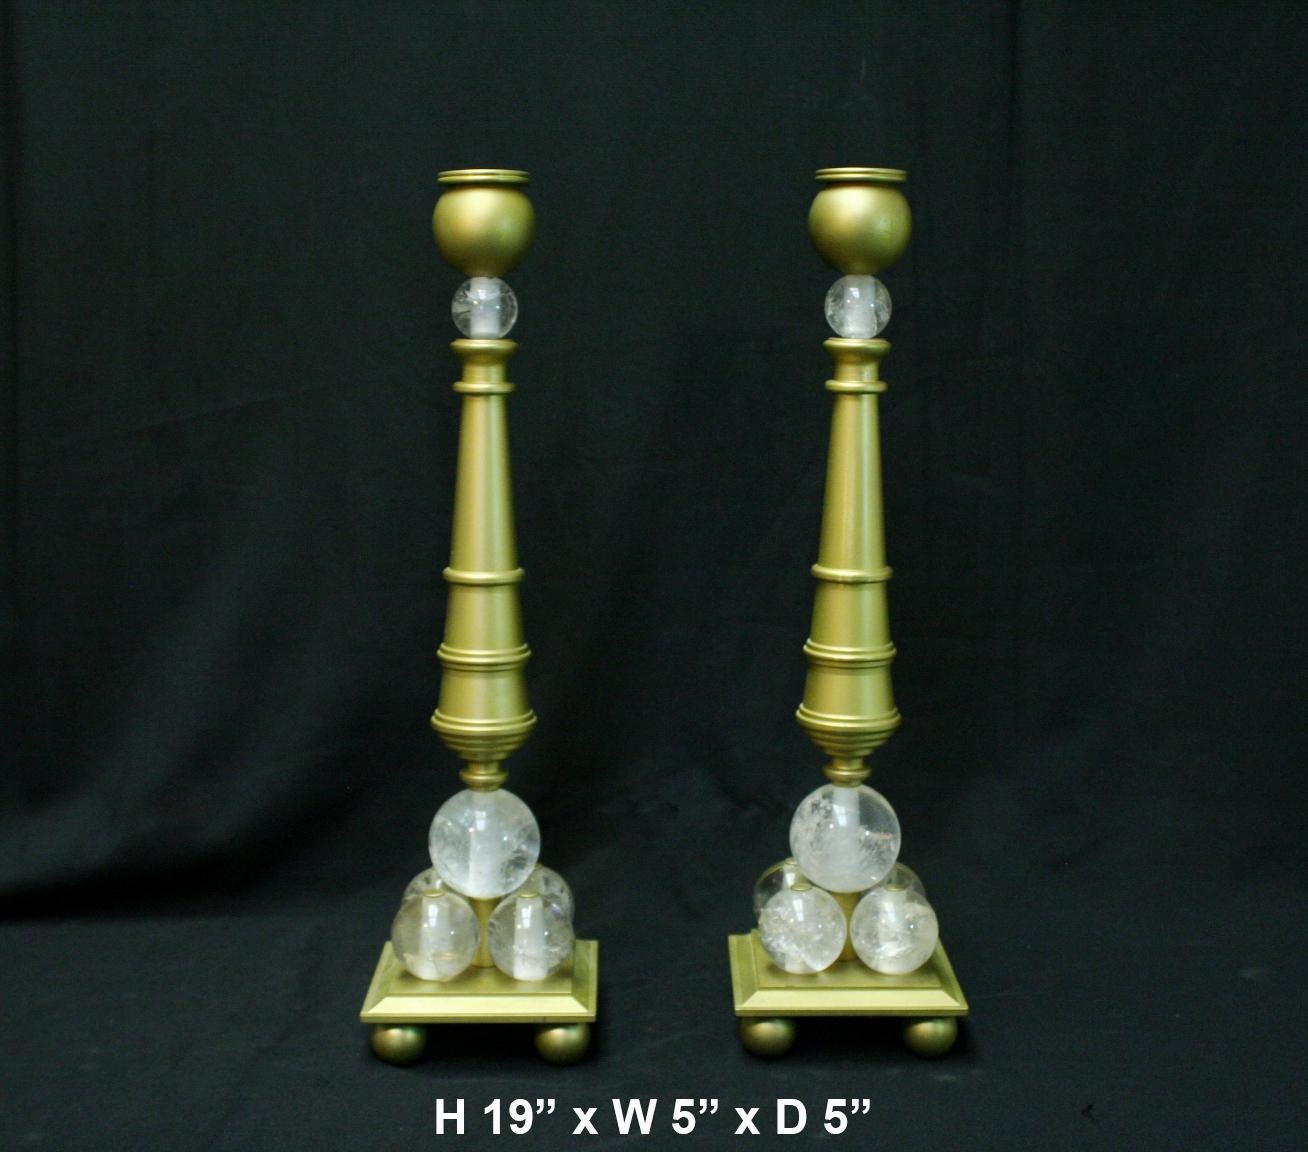 Lovely pair of modern style rock crystal gold bronze candlesticks.
A bulbous candleholder is over a tapered turned shaft, supported by five hand carved and hand polished Rock Crystal balls, all raised on stepped base with four bronze ball feet.